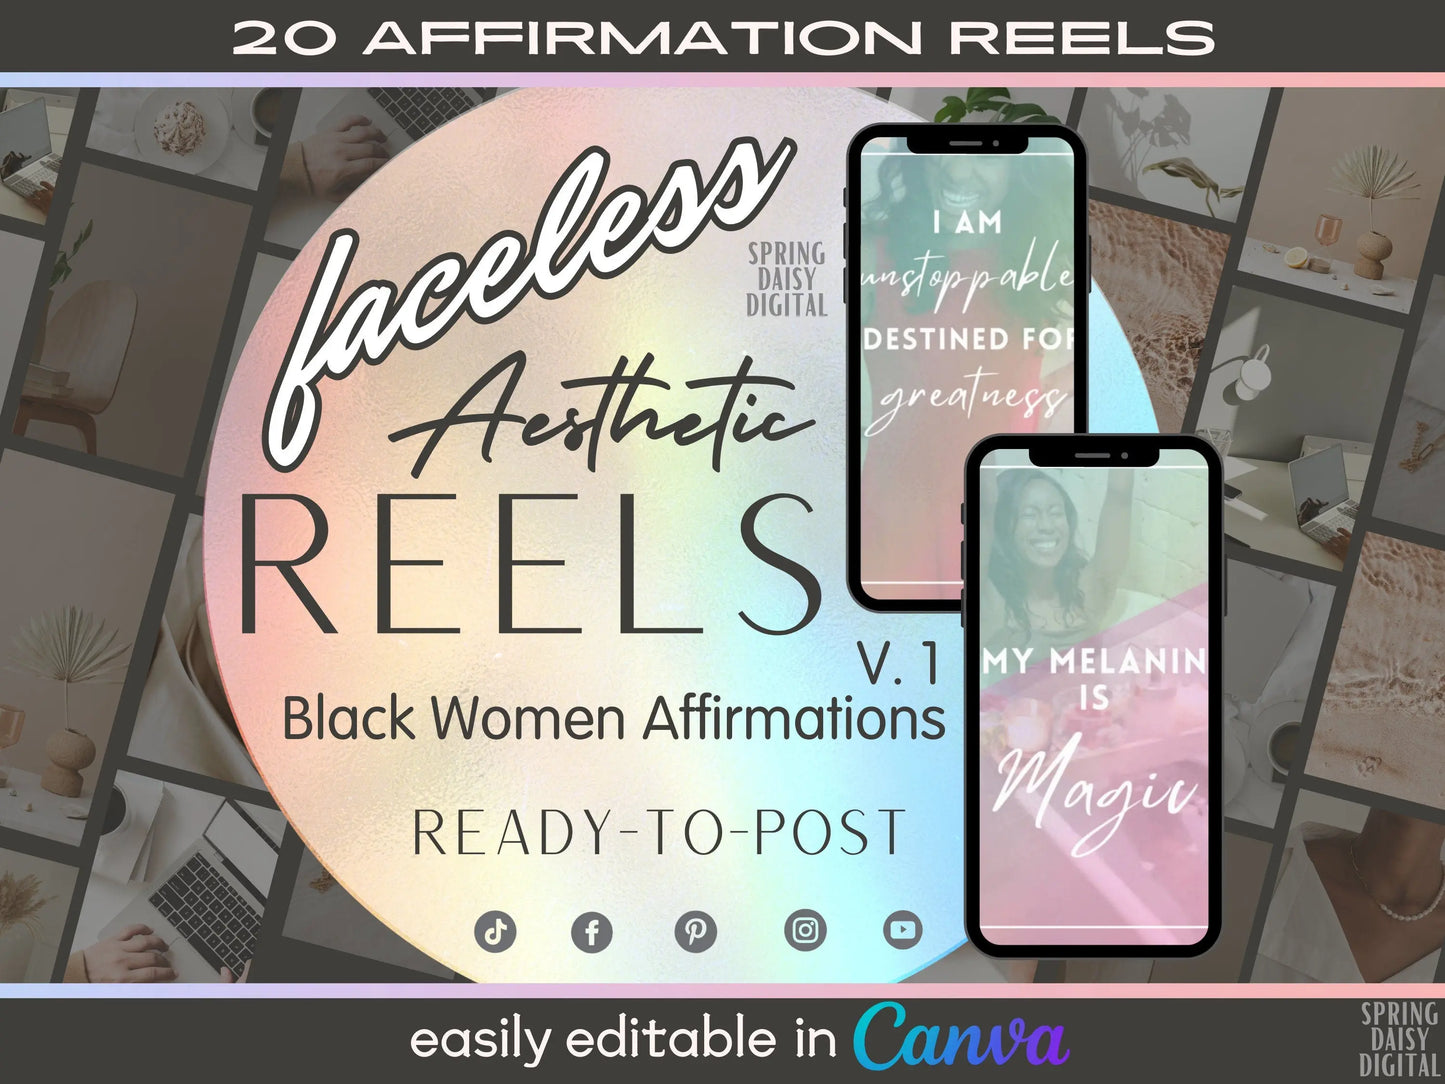 Black Affirmation Reels Motivational Quote Videos Instagram Ready To Post Social Media Canva Editable Template Bundle Soft Girl Content